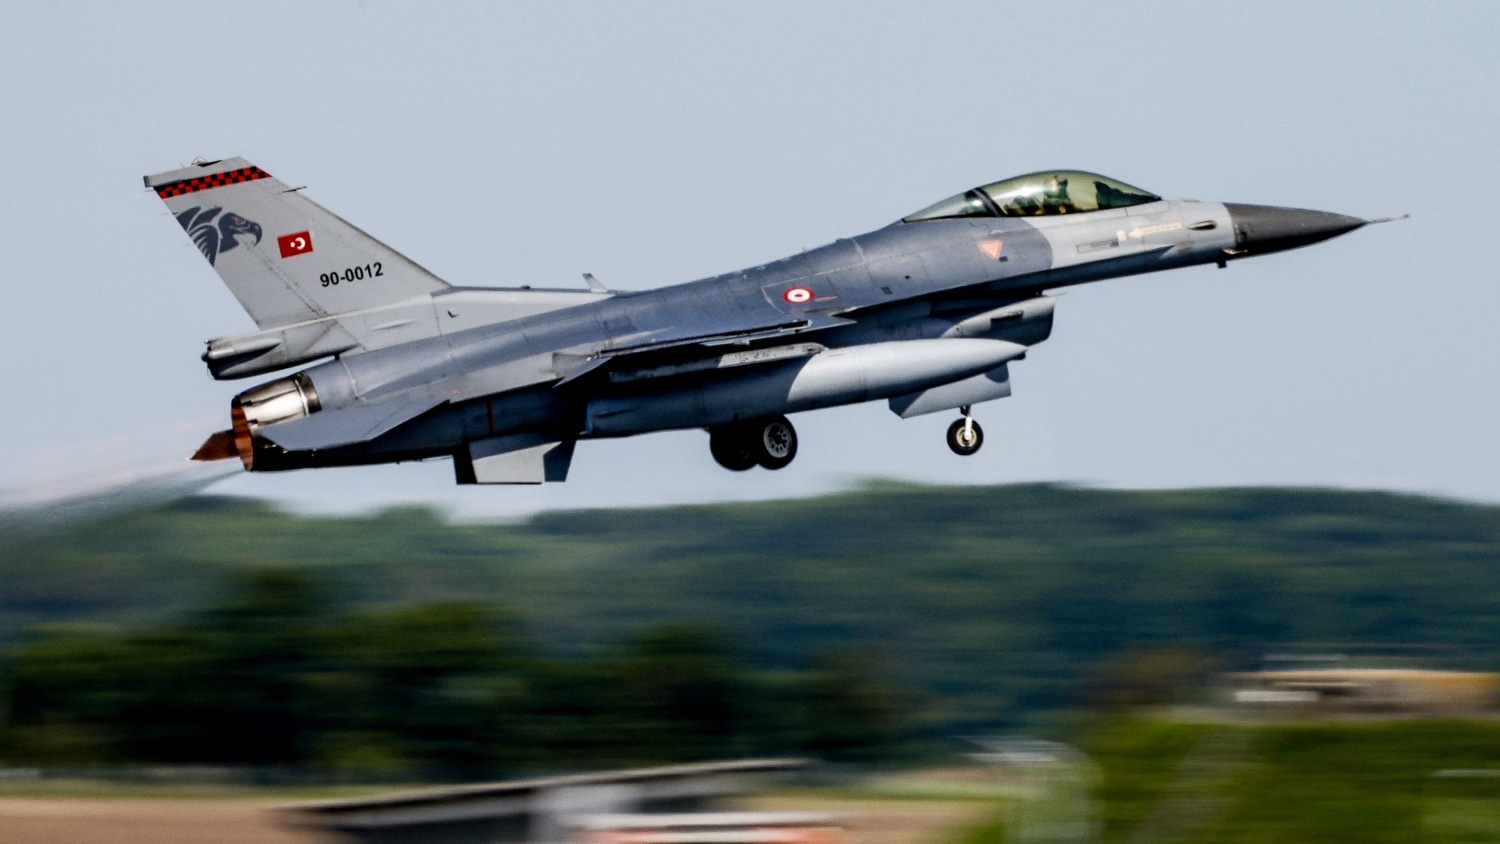 A Turkish F-16 fighter plane takes off at the Air Defender Exercise 2023 in the military airport of Jagel, northern Germany, on 9 June 2023.